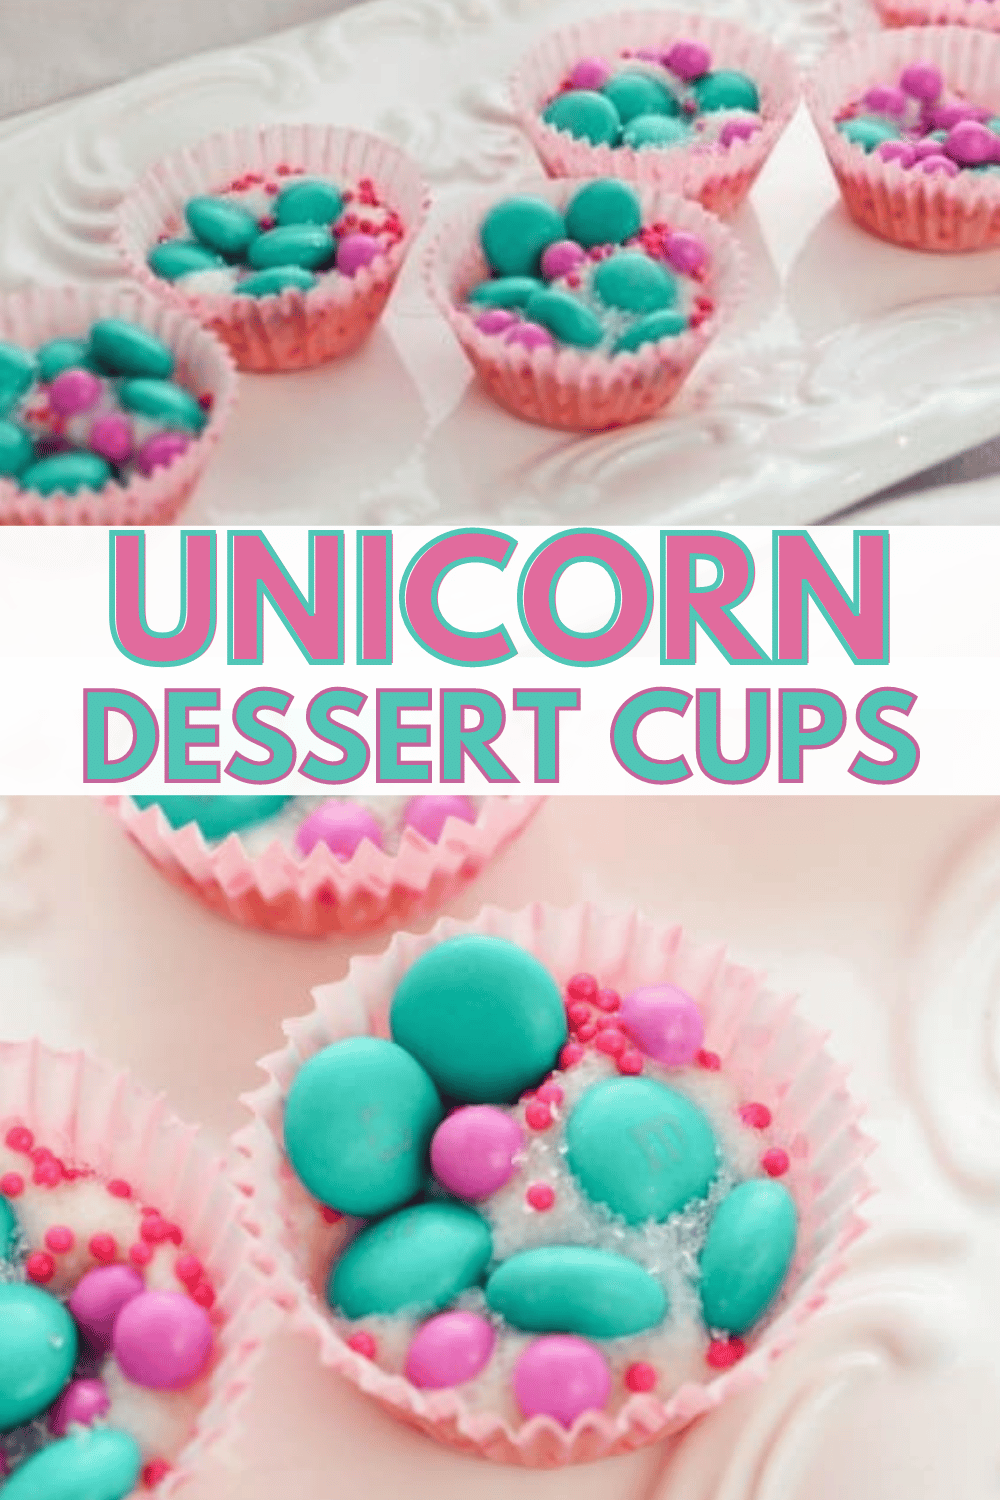 Unicorn dessert cups are an easy dessert recipe and could be used as unicorn food at a princess or unicorn party! These dessert cups are quick to make. #unicorns #dessert #partyfood via @wondermomwannab